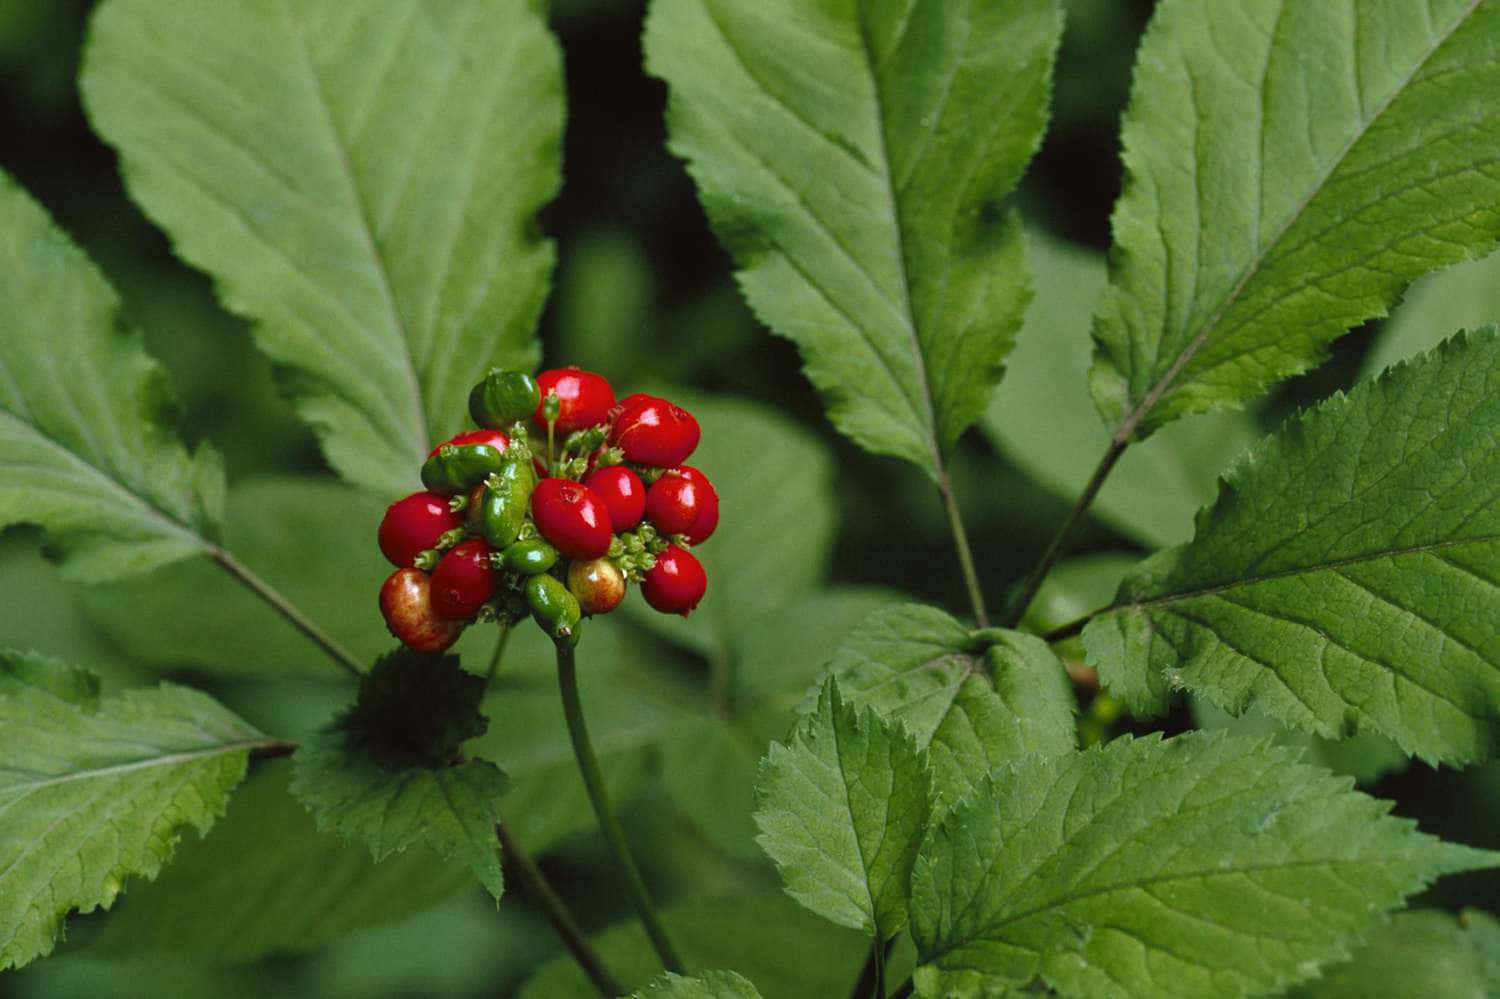 A Ginseng Plant Growing in Nature